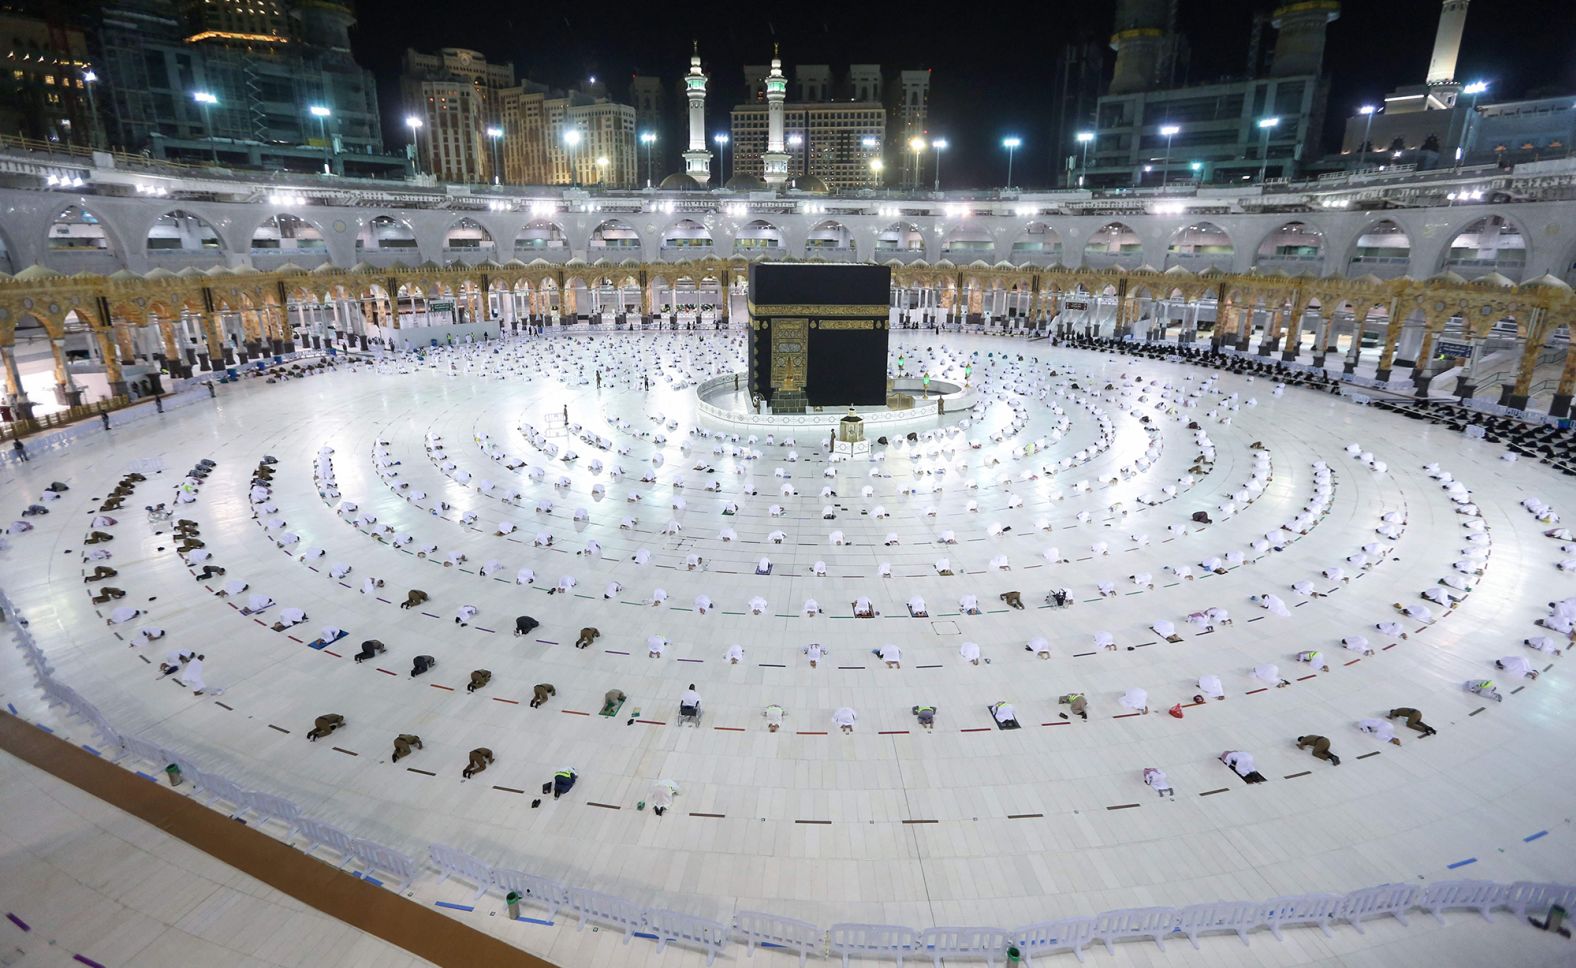 Muslims perform the evening "tarawih" prayer around the Kaaba in Mecca, Saudi Arabia, on April 13. Only people who've been vaccinated or recently recovered from Covid-19 will be allowed to perform prayers at the Grand Mosque.